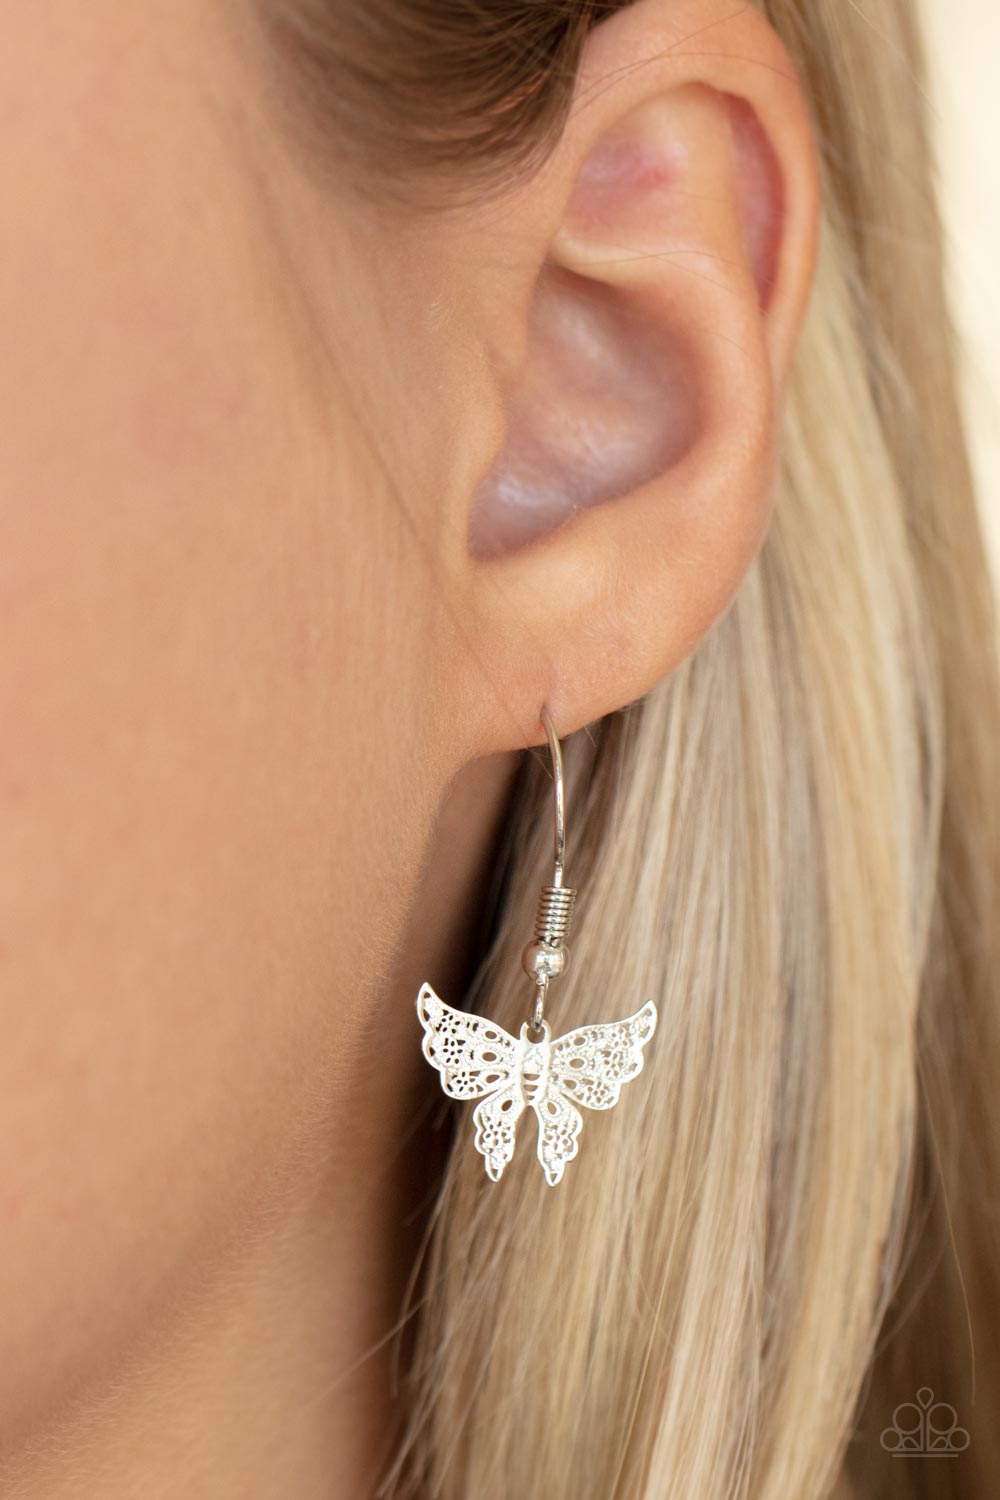 Bountiful Butterflies White and Silver Necklace - Paparazzi Accessories - free matching earrings - CarasShop.com - $5 Jewelry by Cara Jewels